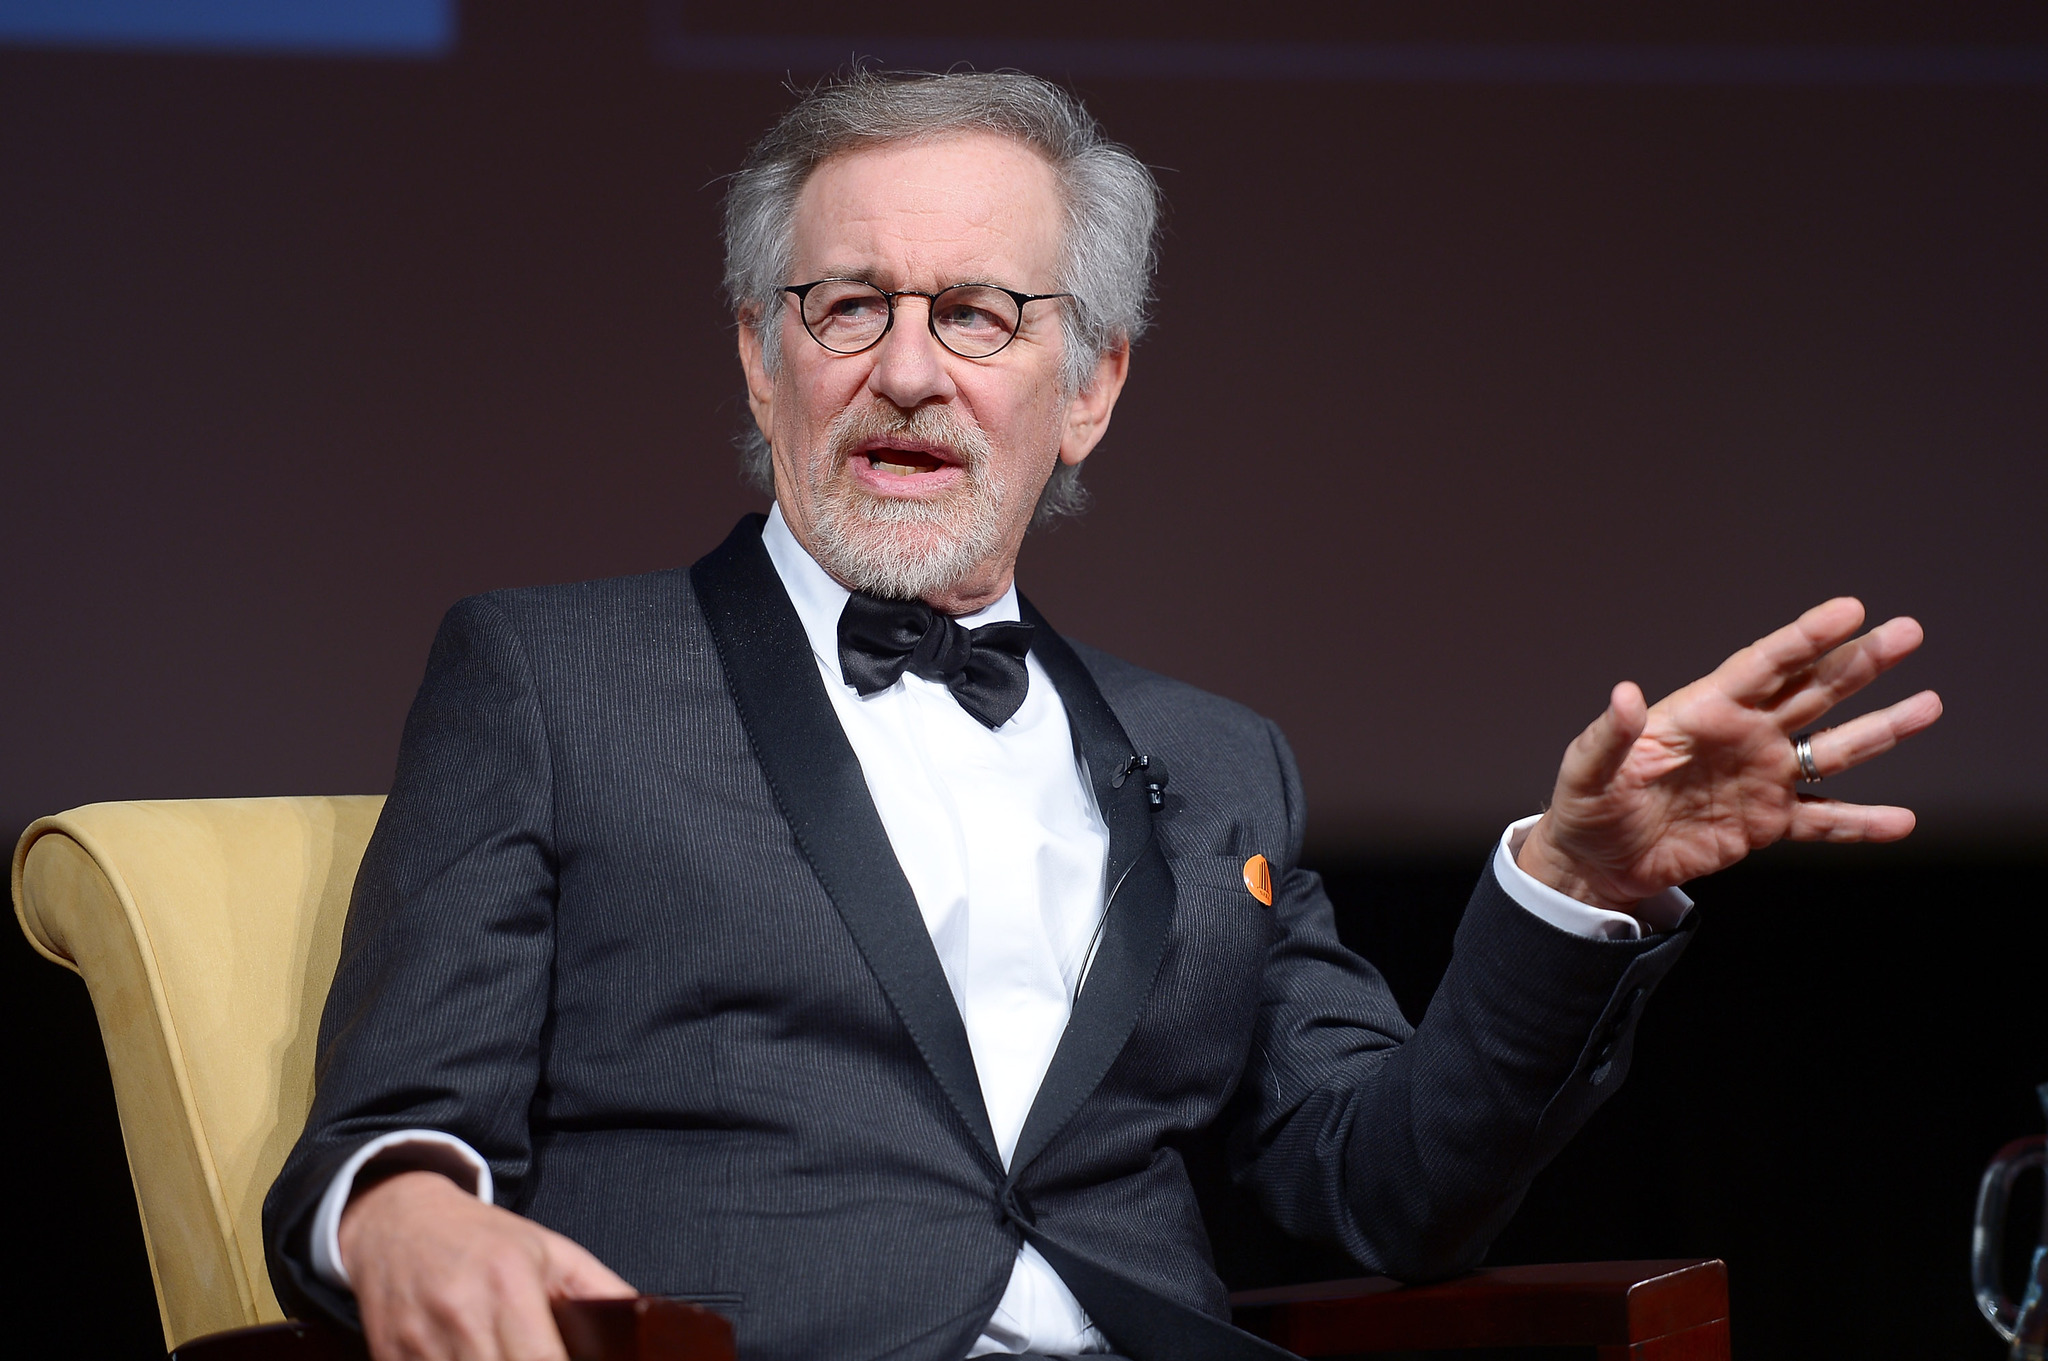 Filmmaker and honoree Steven Spielberg speaks onstage at the Foundation for the National Archives 2013 Records of Achievement award ceremony and gala in honor of Steven Spielberg on November 19, 2013 in Washington, D.C.